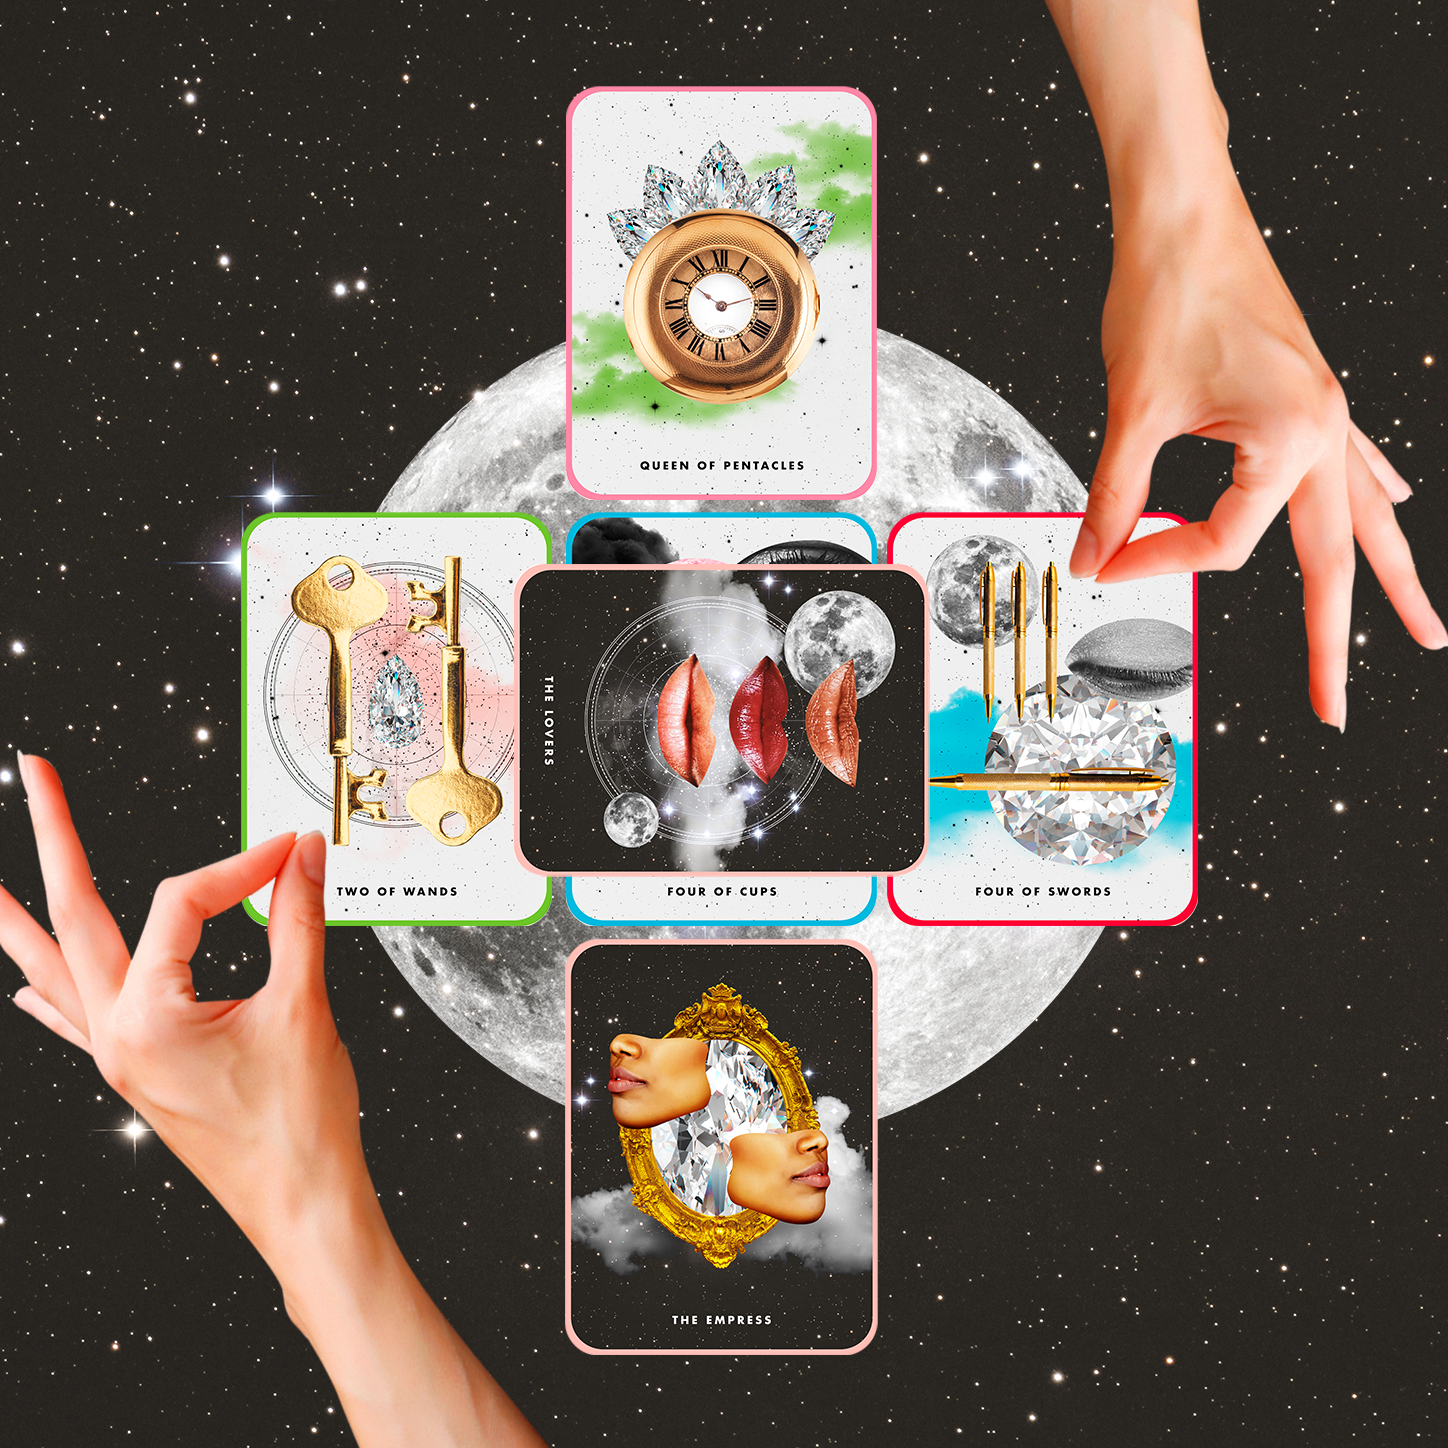 Your Weekly Tarot Card Reading Asks You to Reconsider That Goal